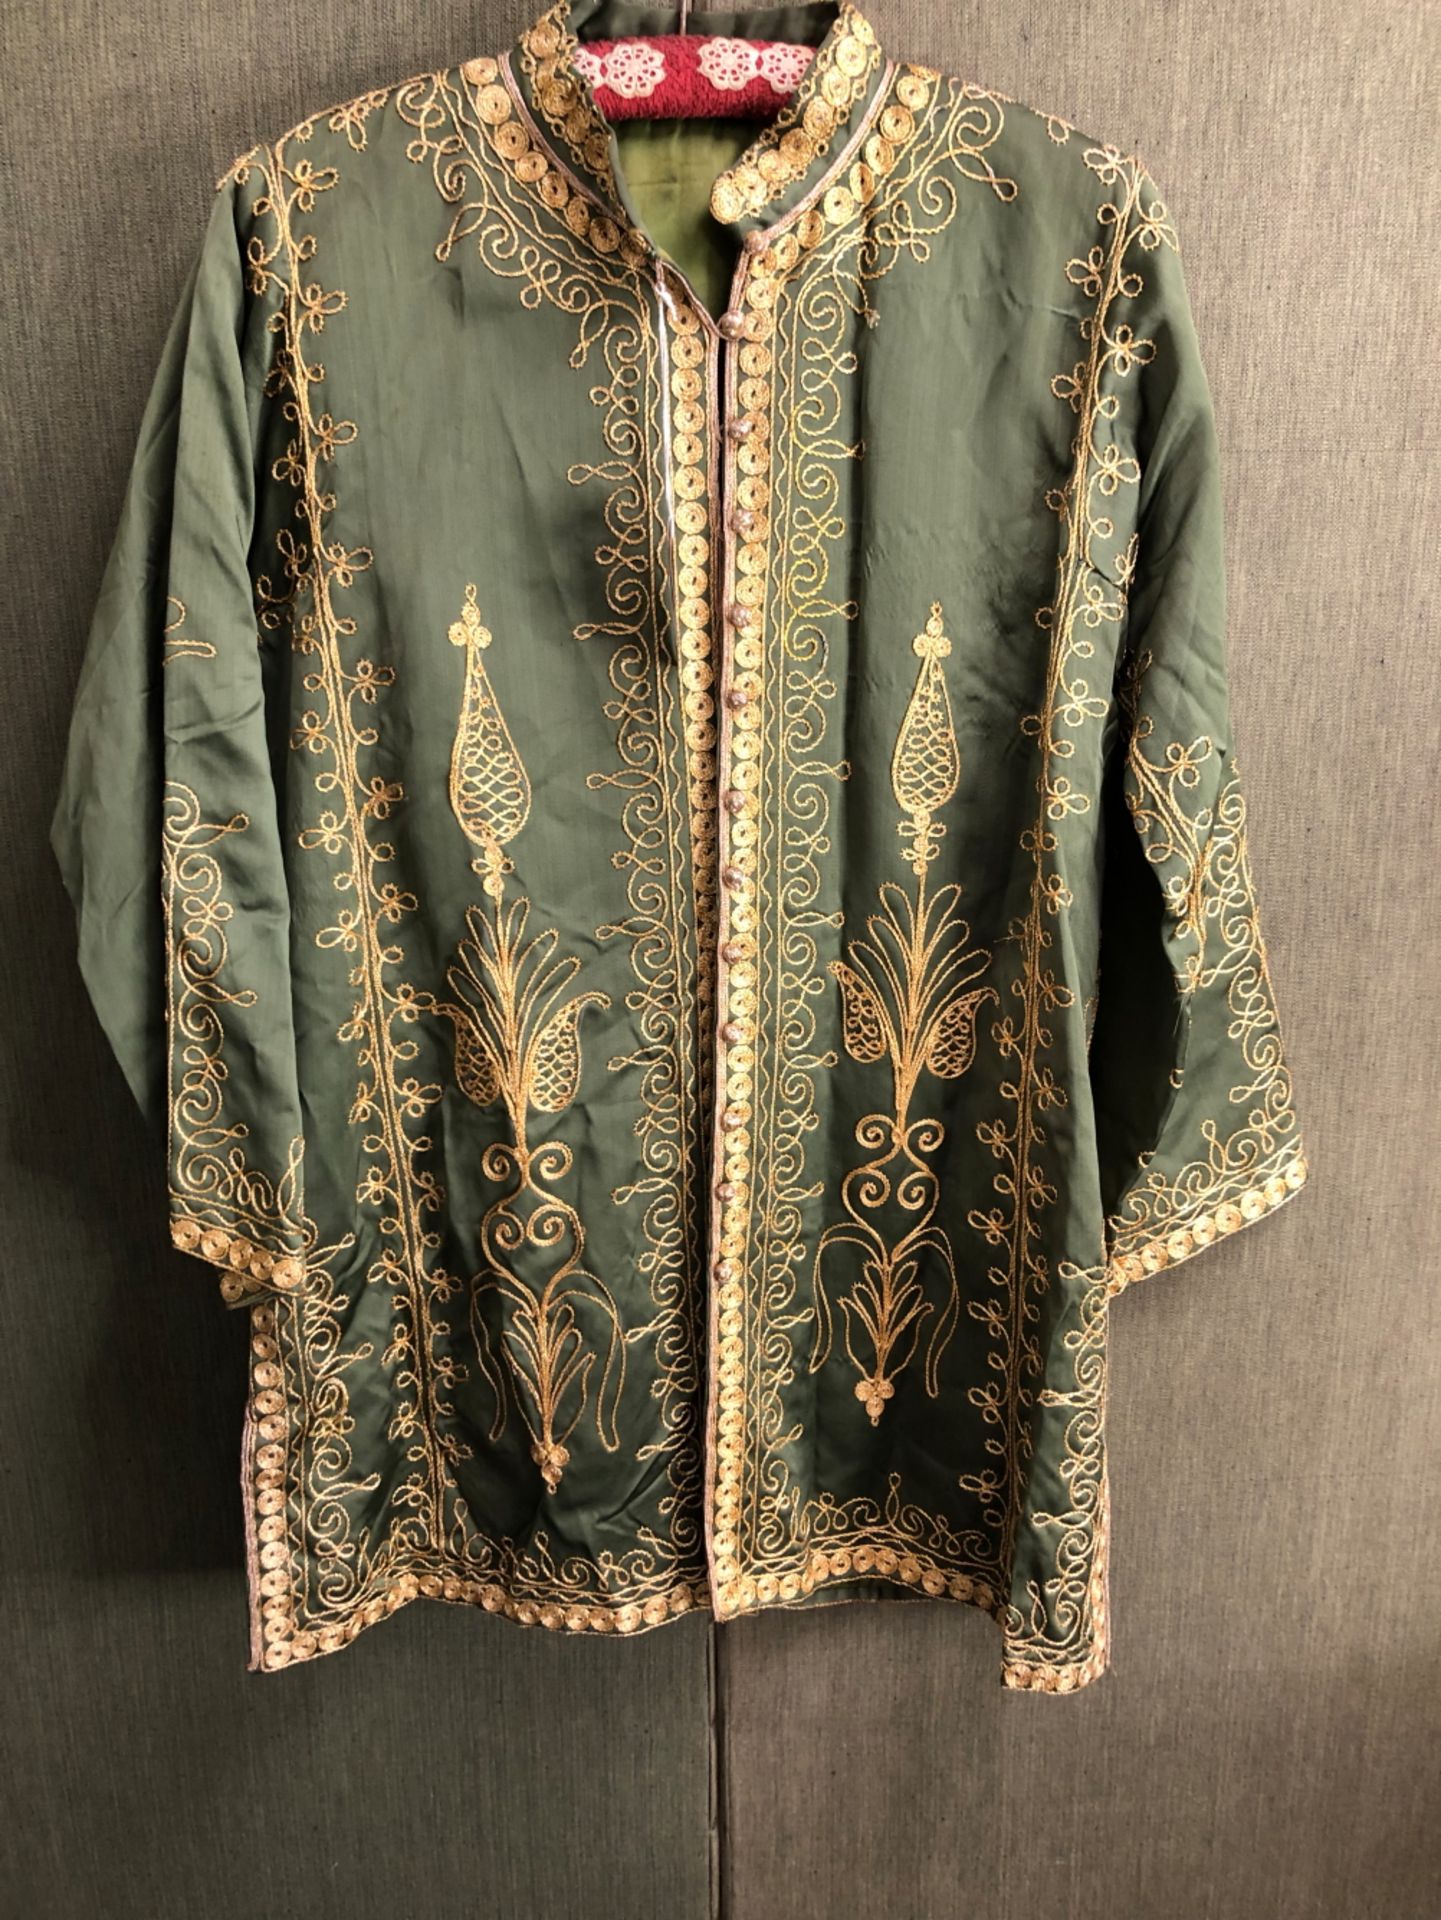 JACKET, AN INDIAN GREEN SILK JACKET EMBROIDERED IN GOLD THREAD, SLEEVE LENGTH 48cms, NECK TO HEM